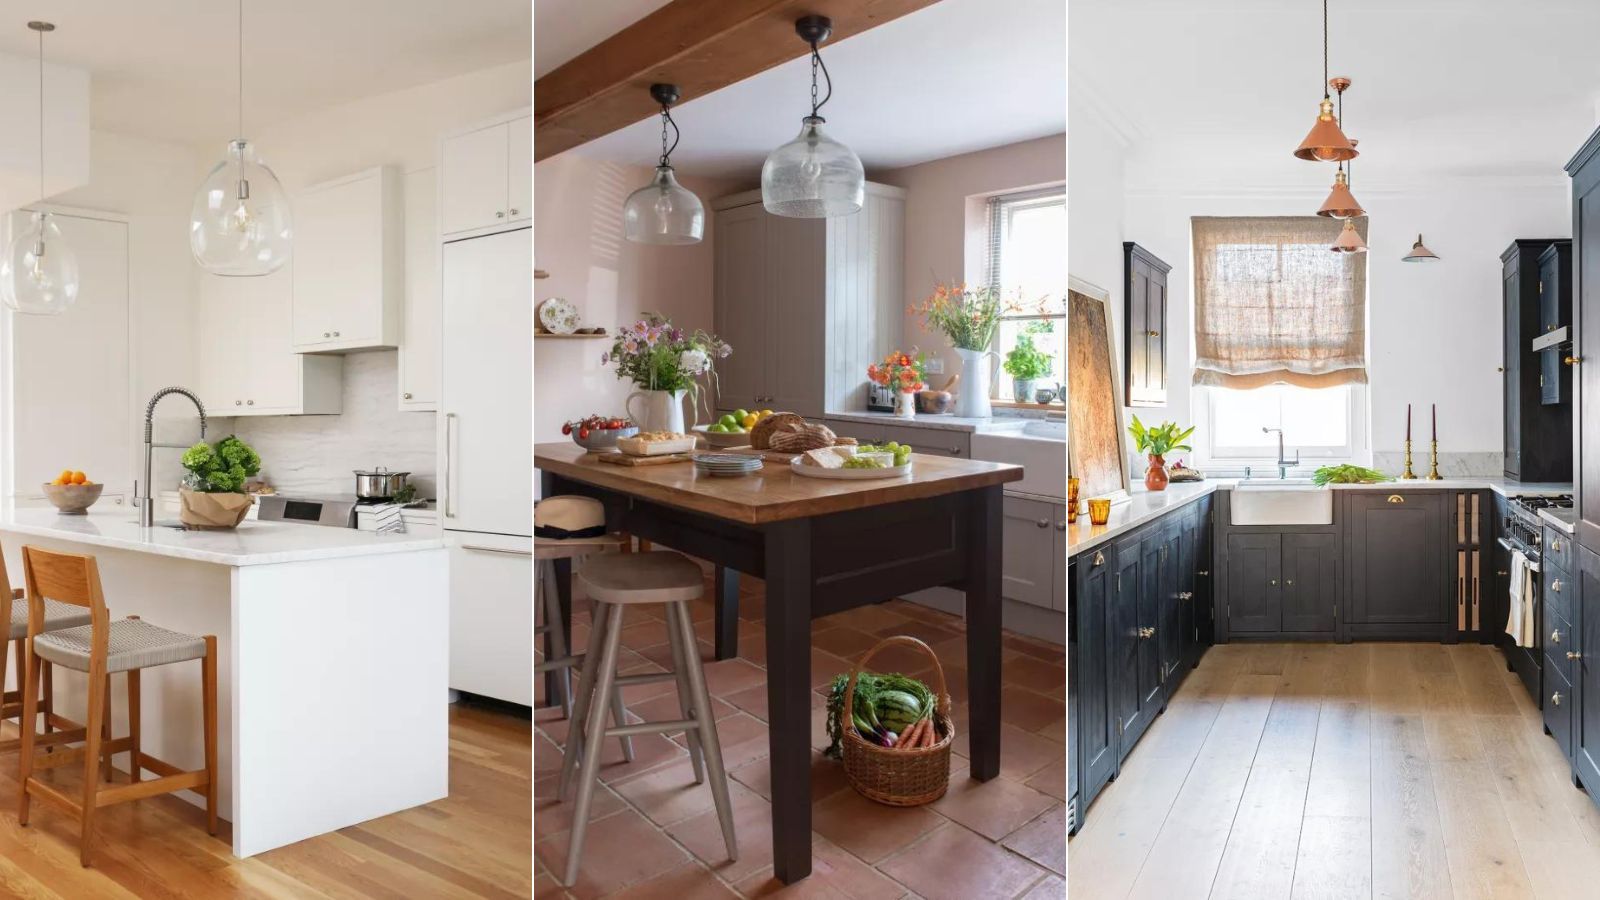 11 outdated kitchen rules you can ignore when designing a small kitchen